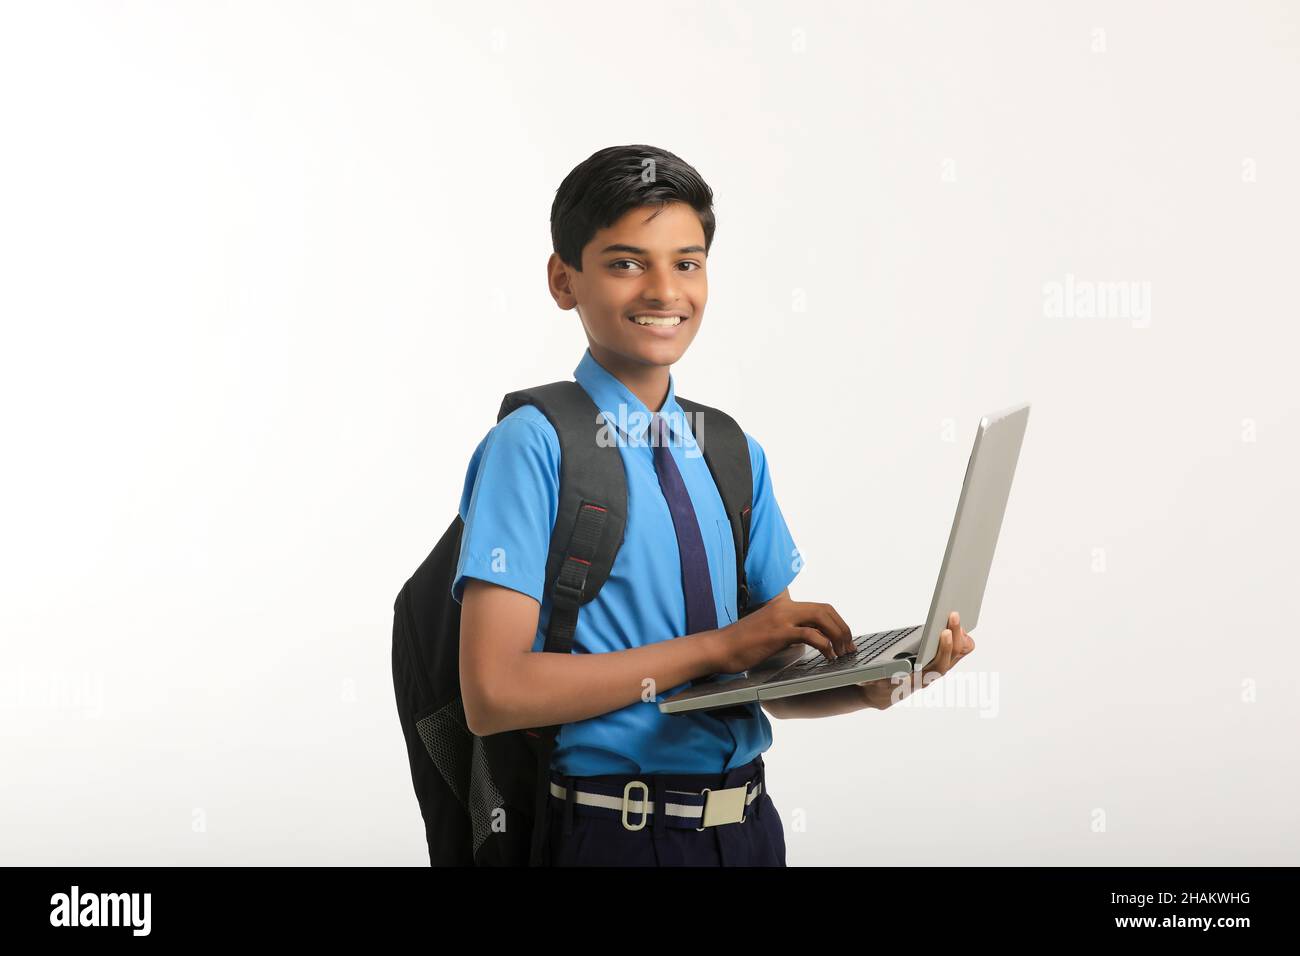 Indian school boy in uniform and using laptop on white background. Stock Photo